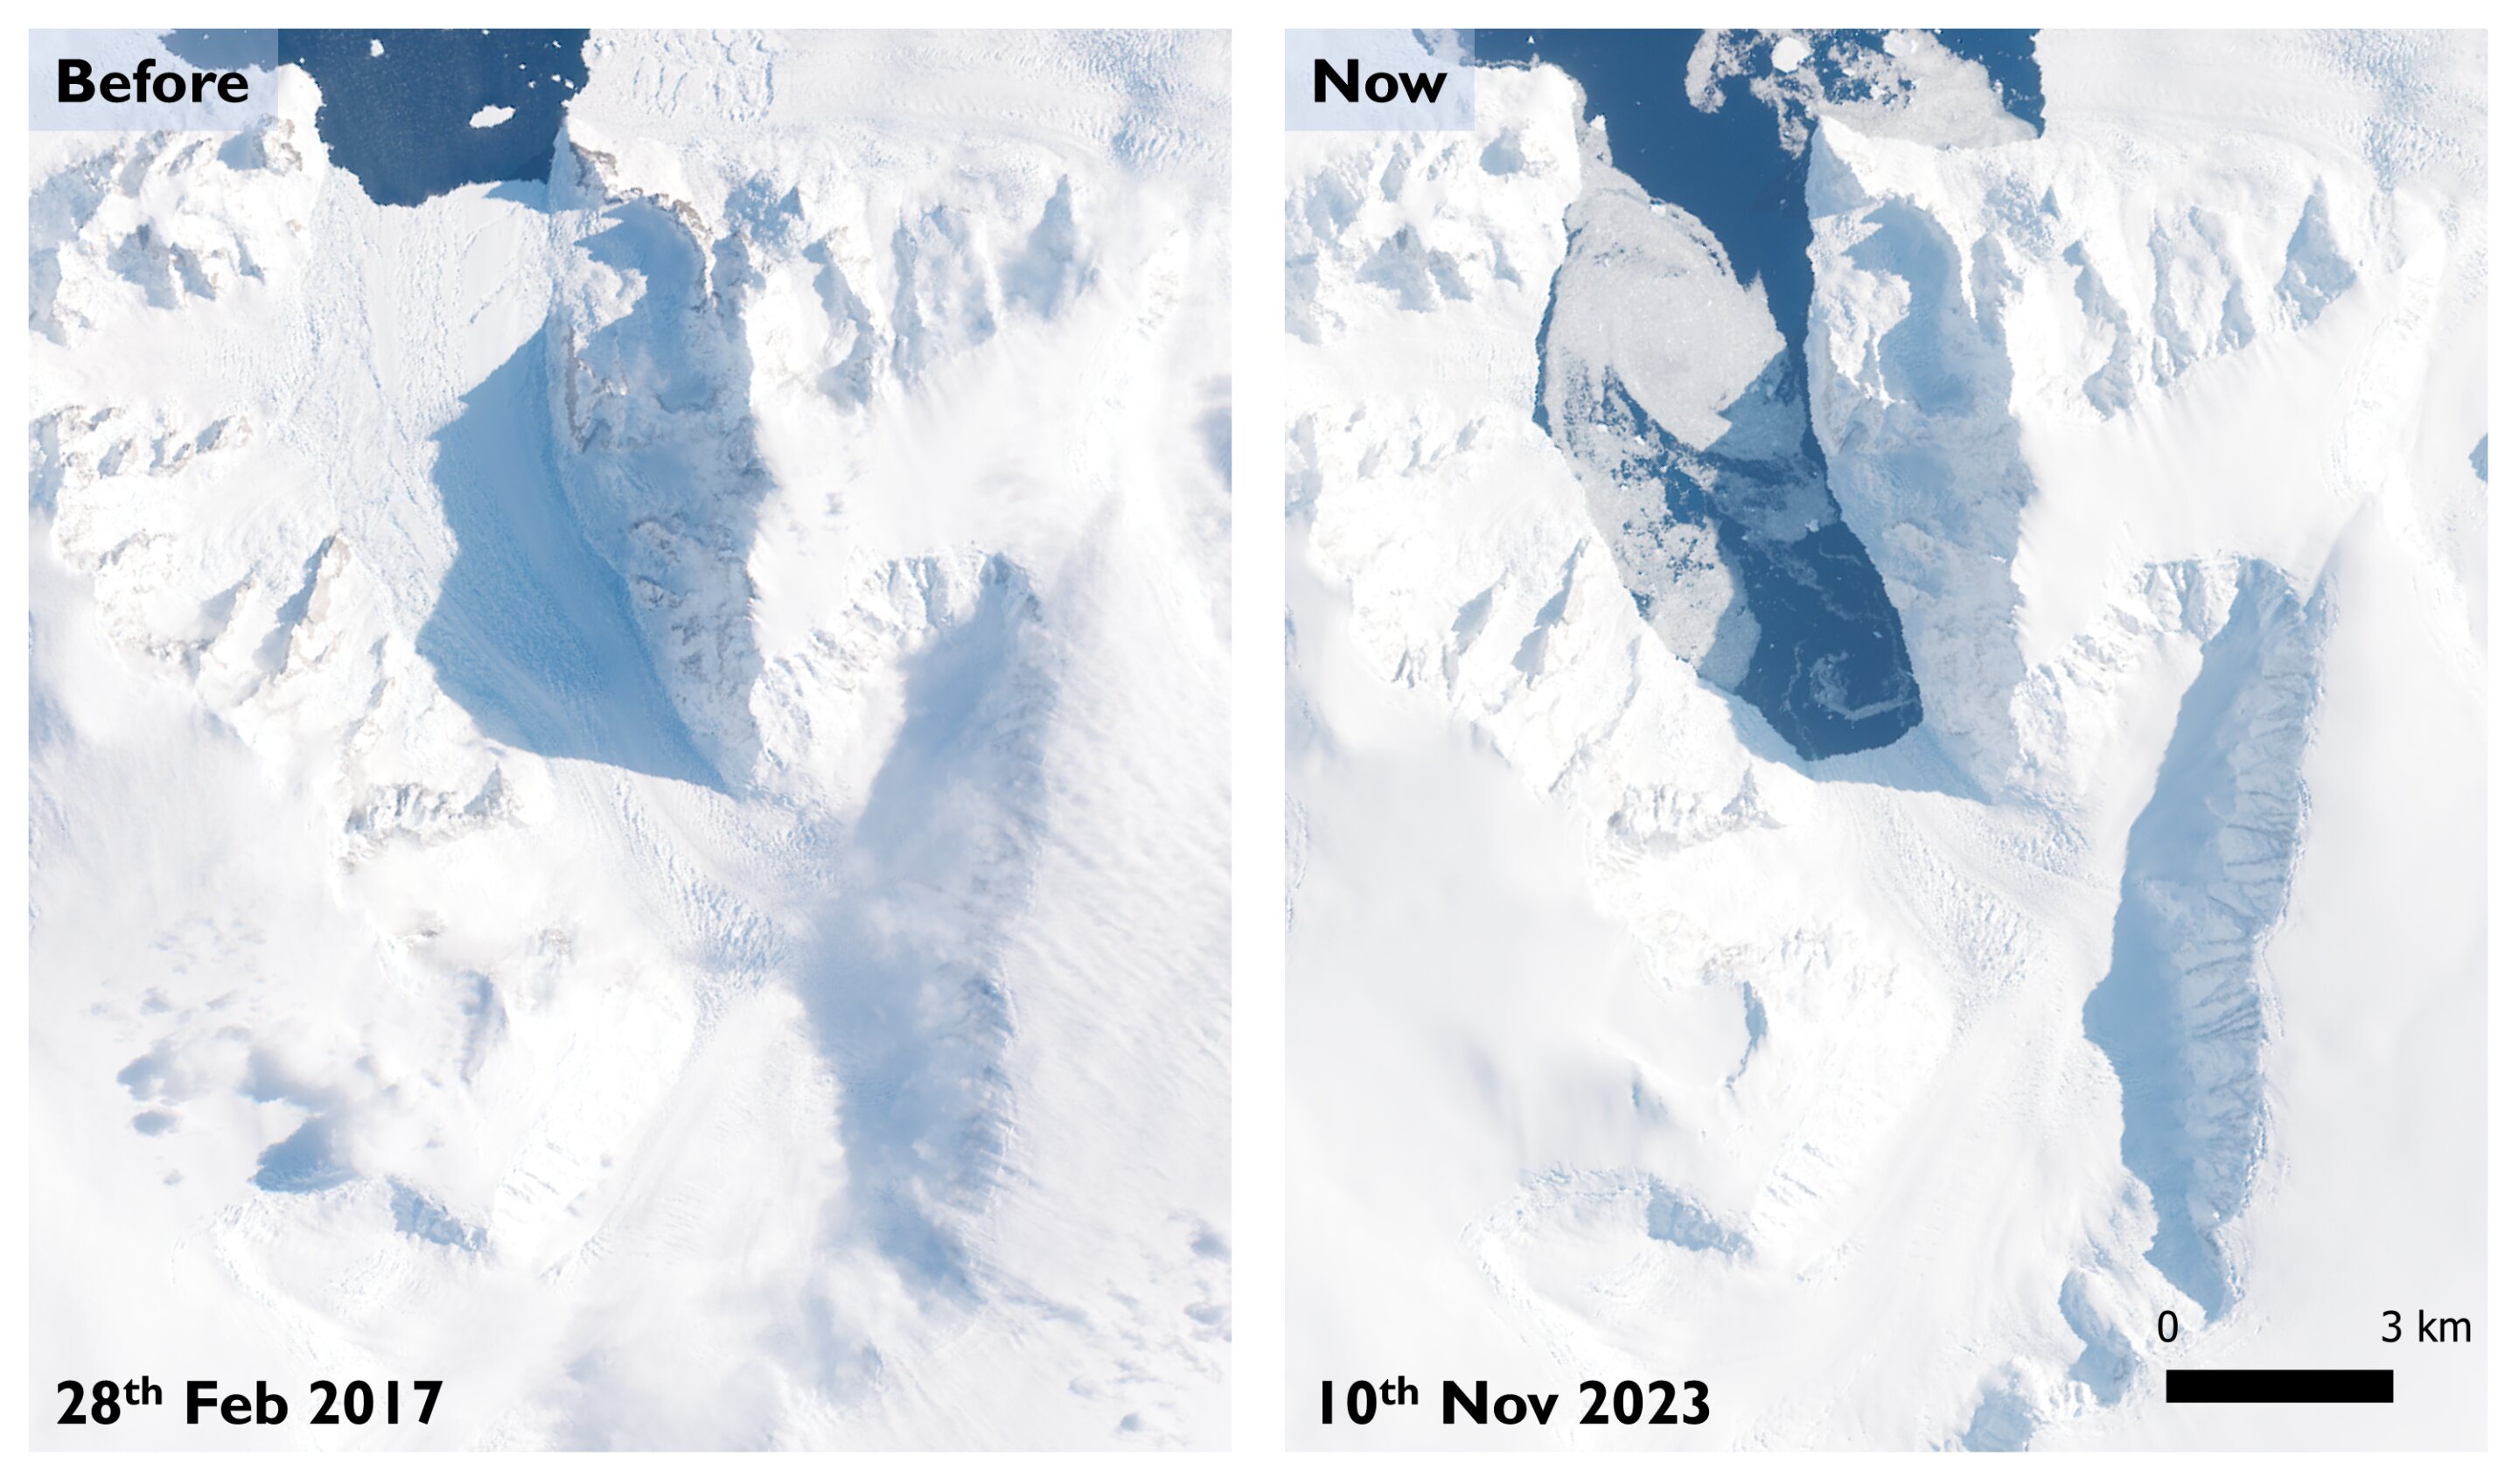 INCREDIBLE COLLAPSE TRIGGERED BY GLACIER CALVING